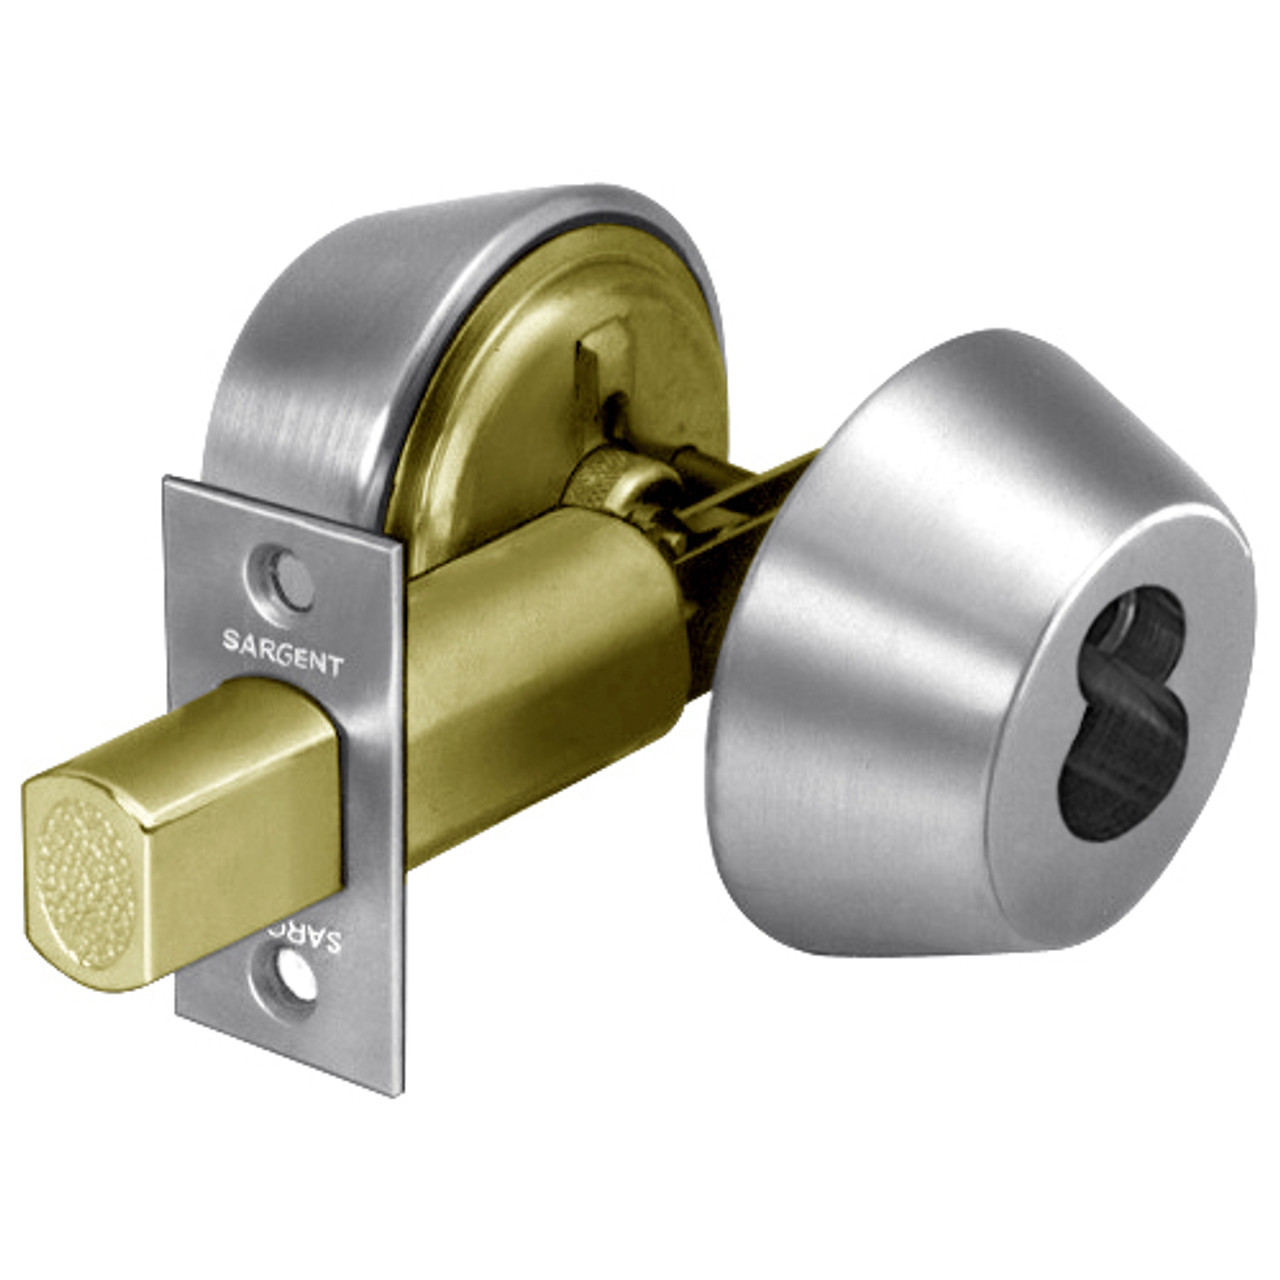 60-484-26 Sargent 480 Series Double Cylinder Auxiliary Deadbolt Lock Prepped for LFIC in Bright Chrome